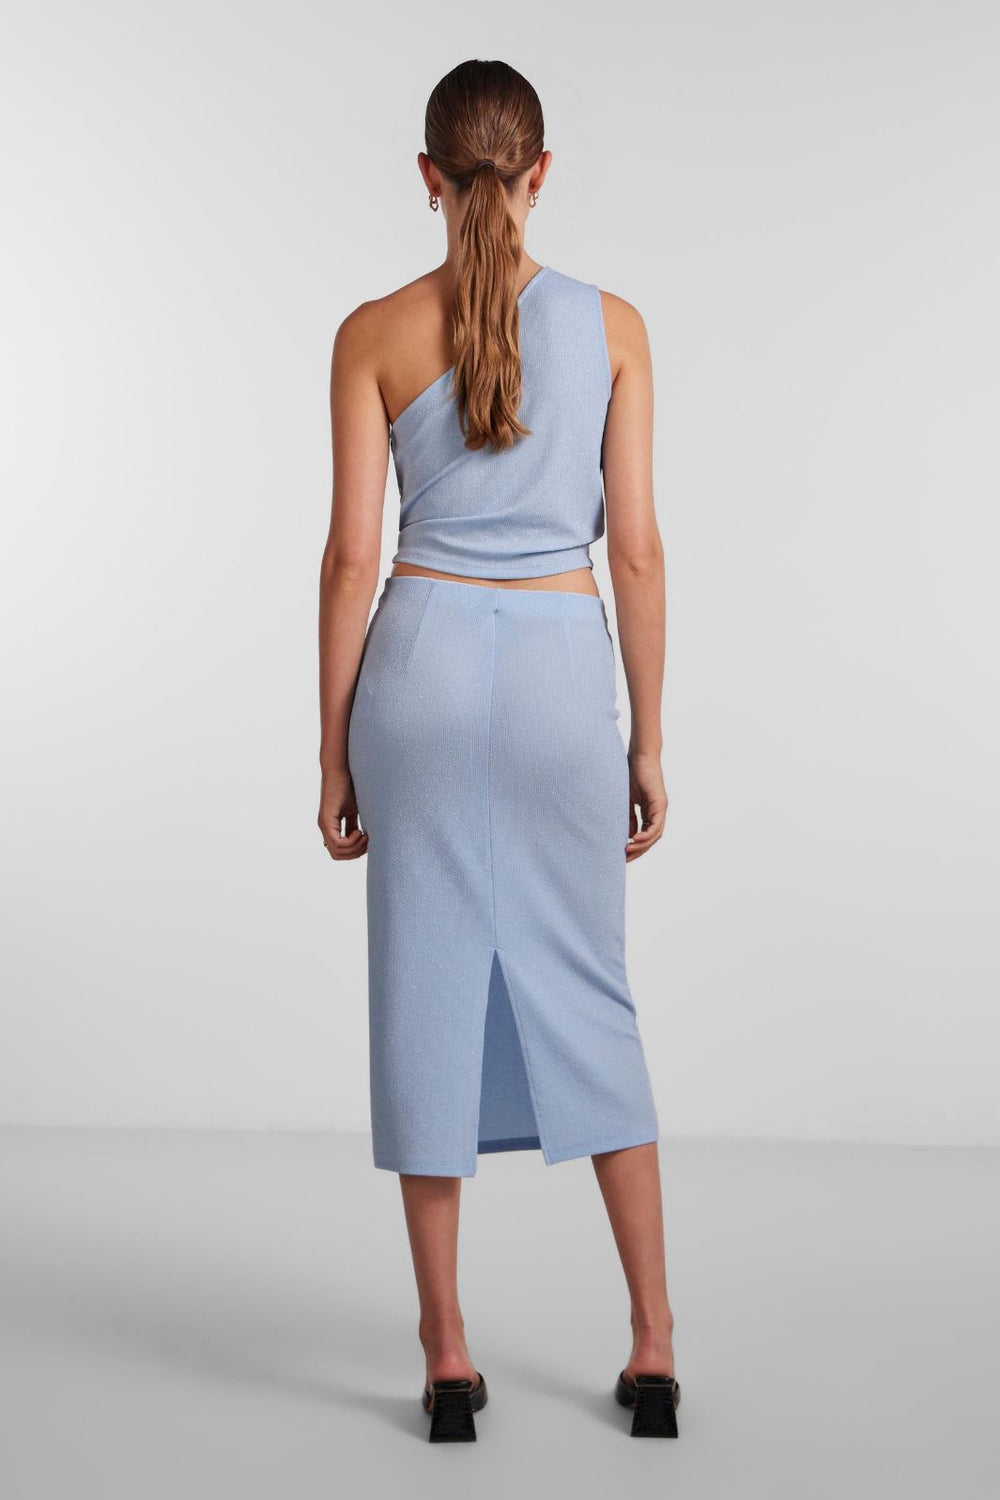 Pieces - Pclina Midi Skirt - Airy Blue Nederdele 